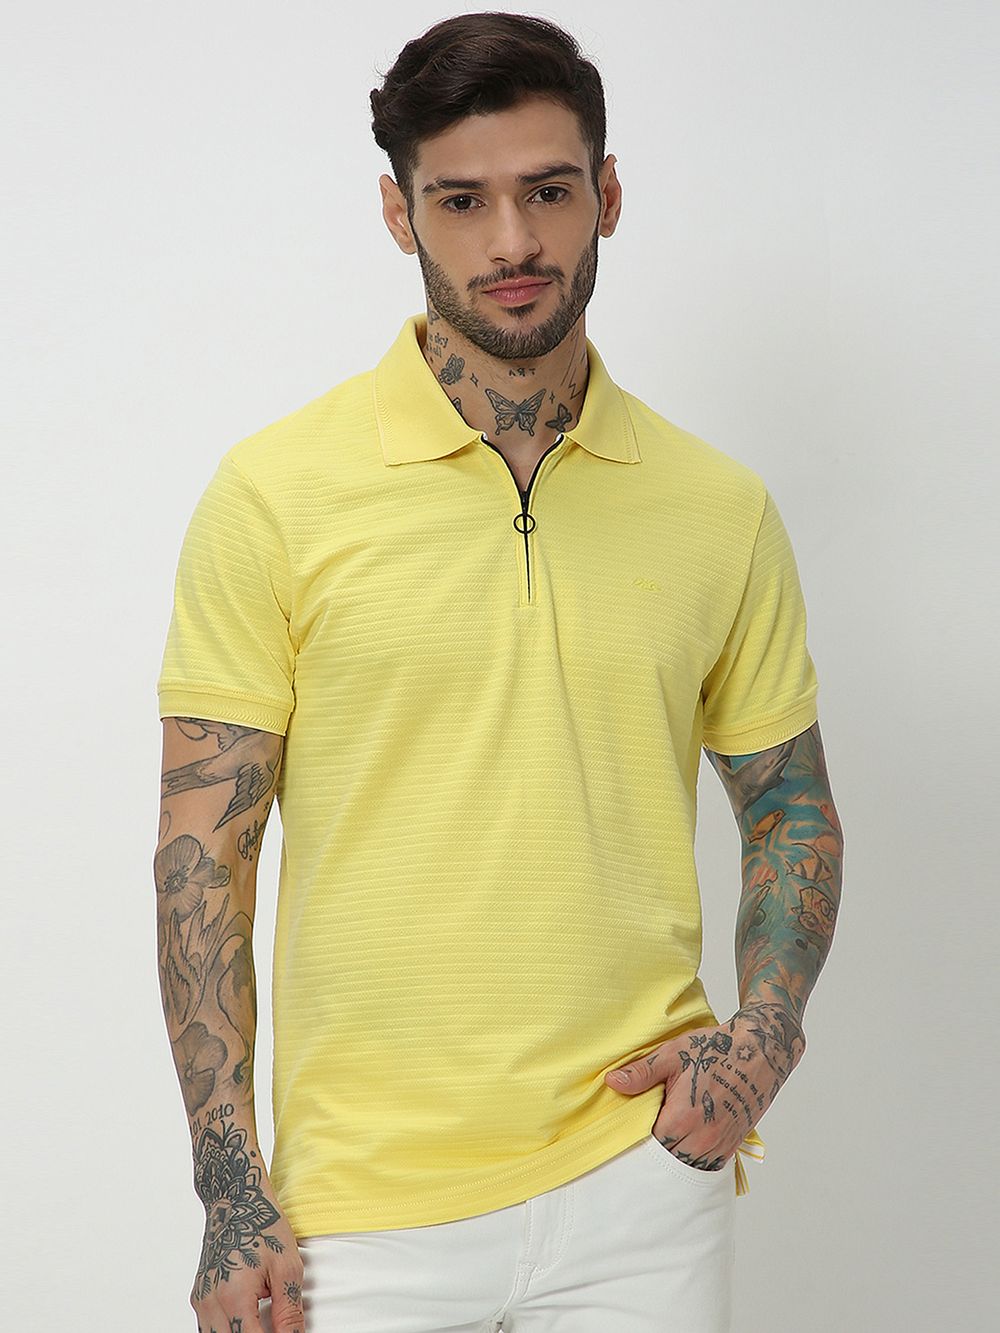 Mustard Textured Solid Jersey Polo T-Shirt